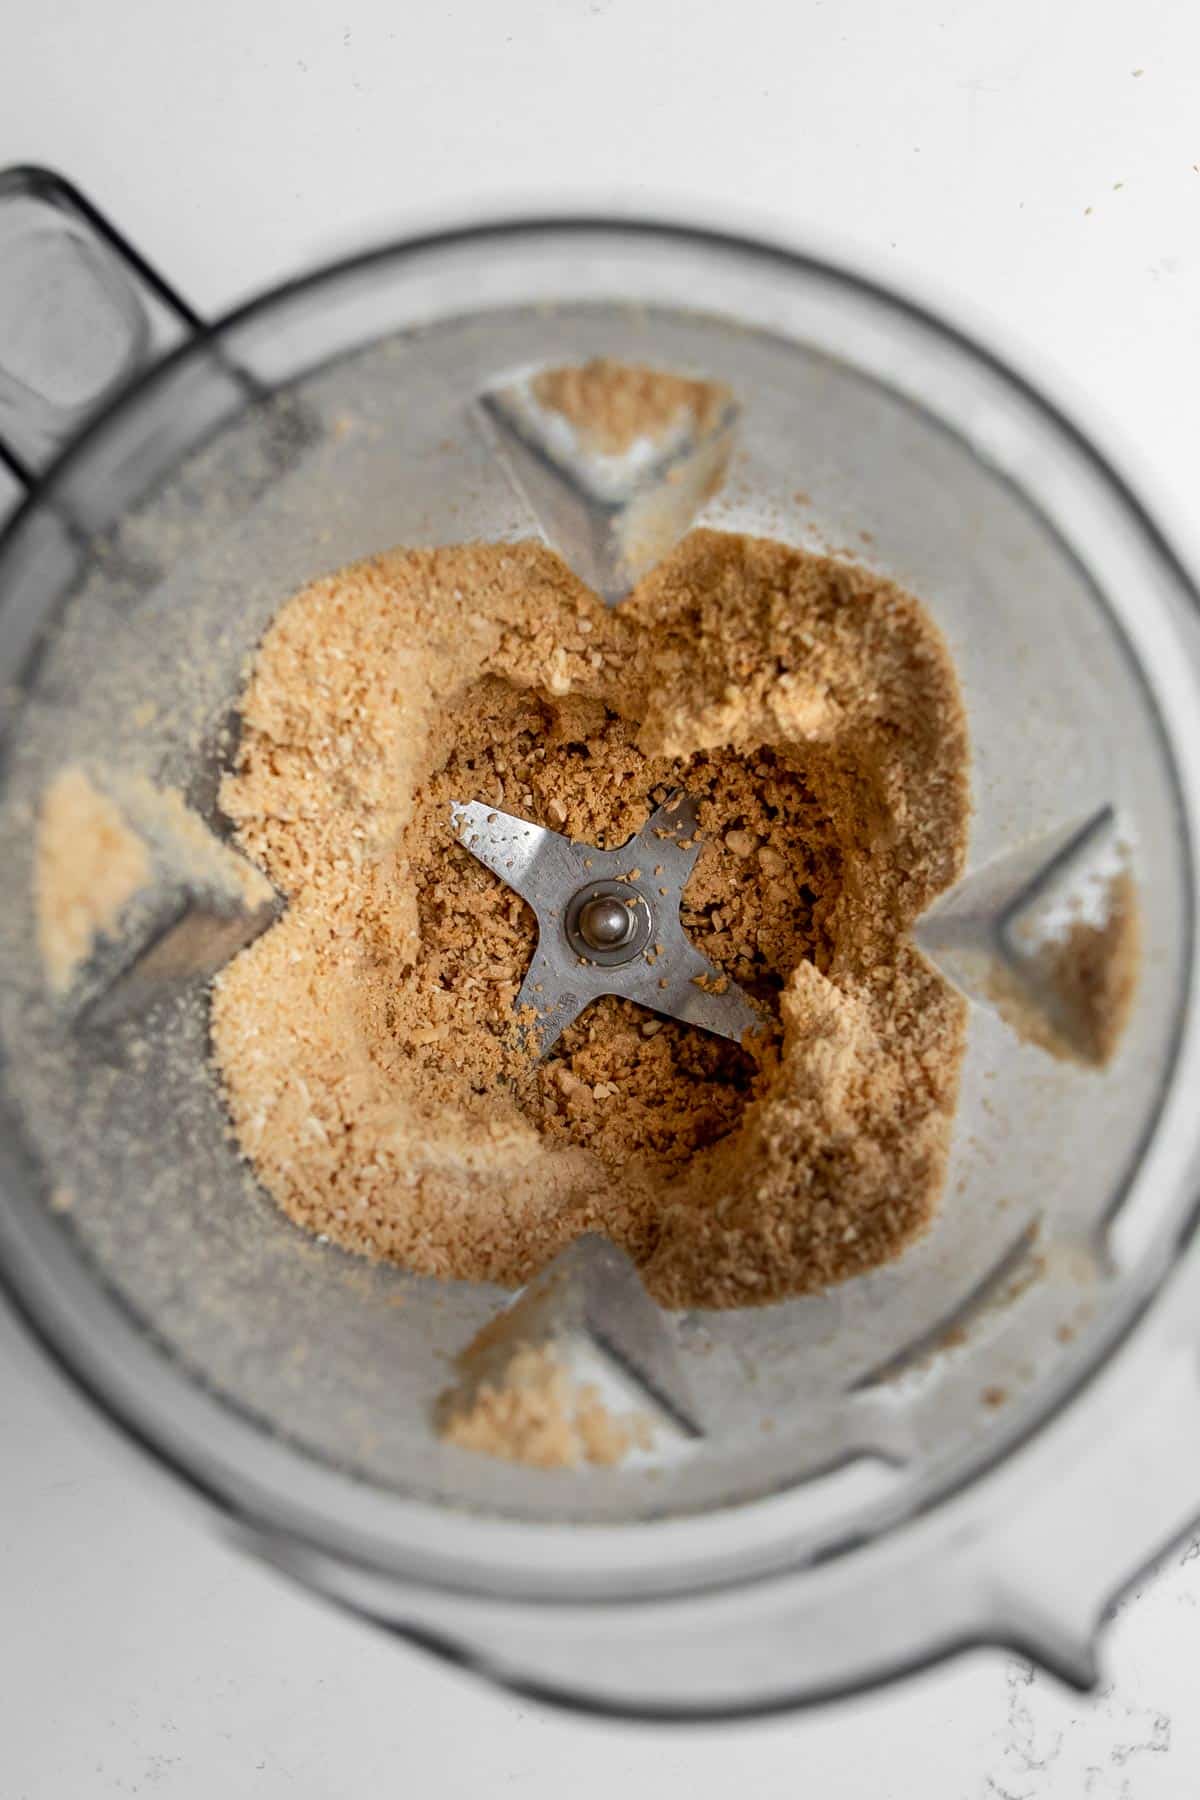 Overhead view of cashew powder in a blender container.